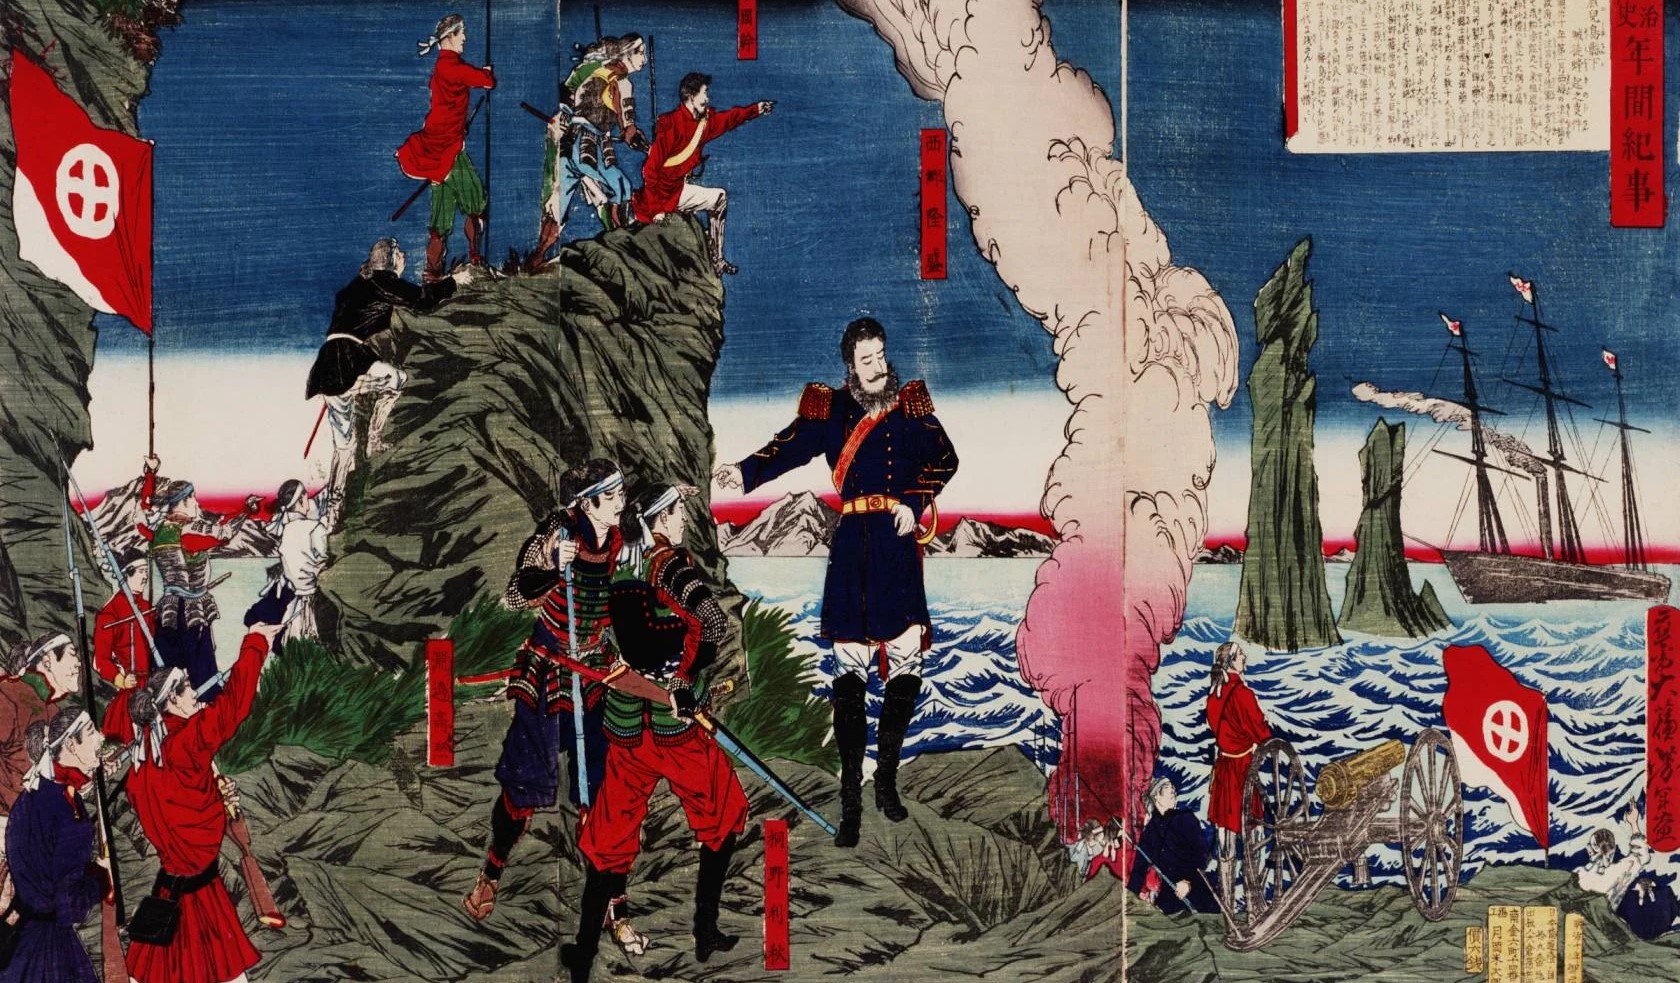 The Meiji Restoration of 1868 marked a pivotal moment in Japanese history